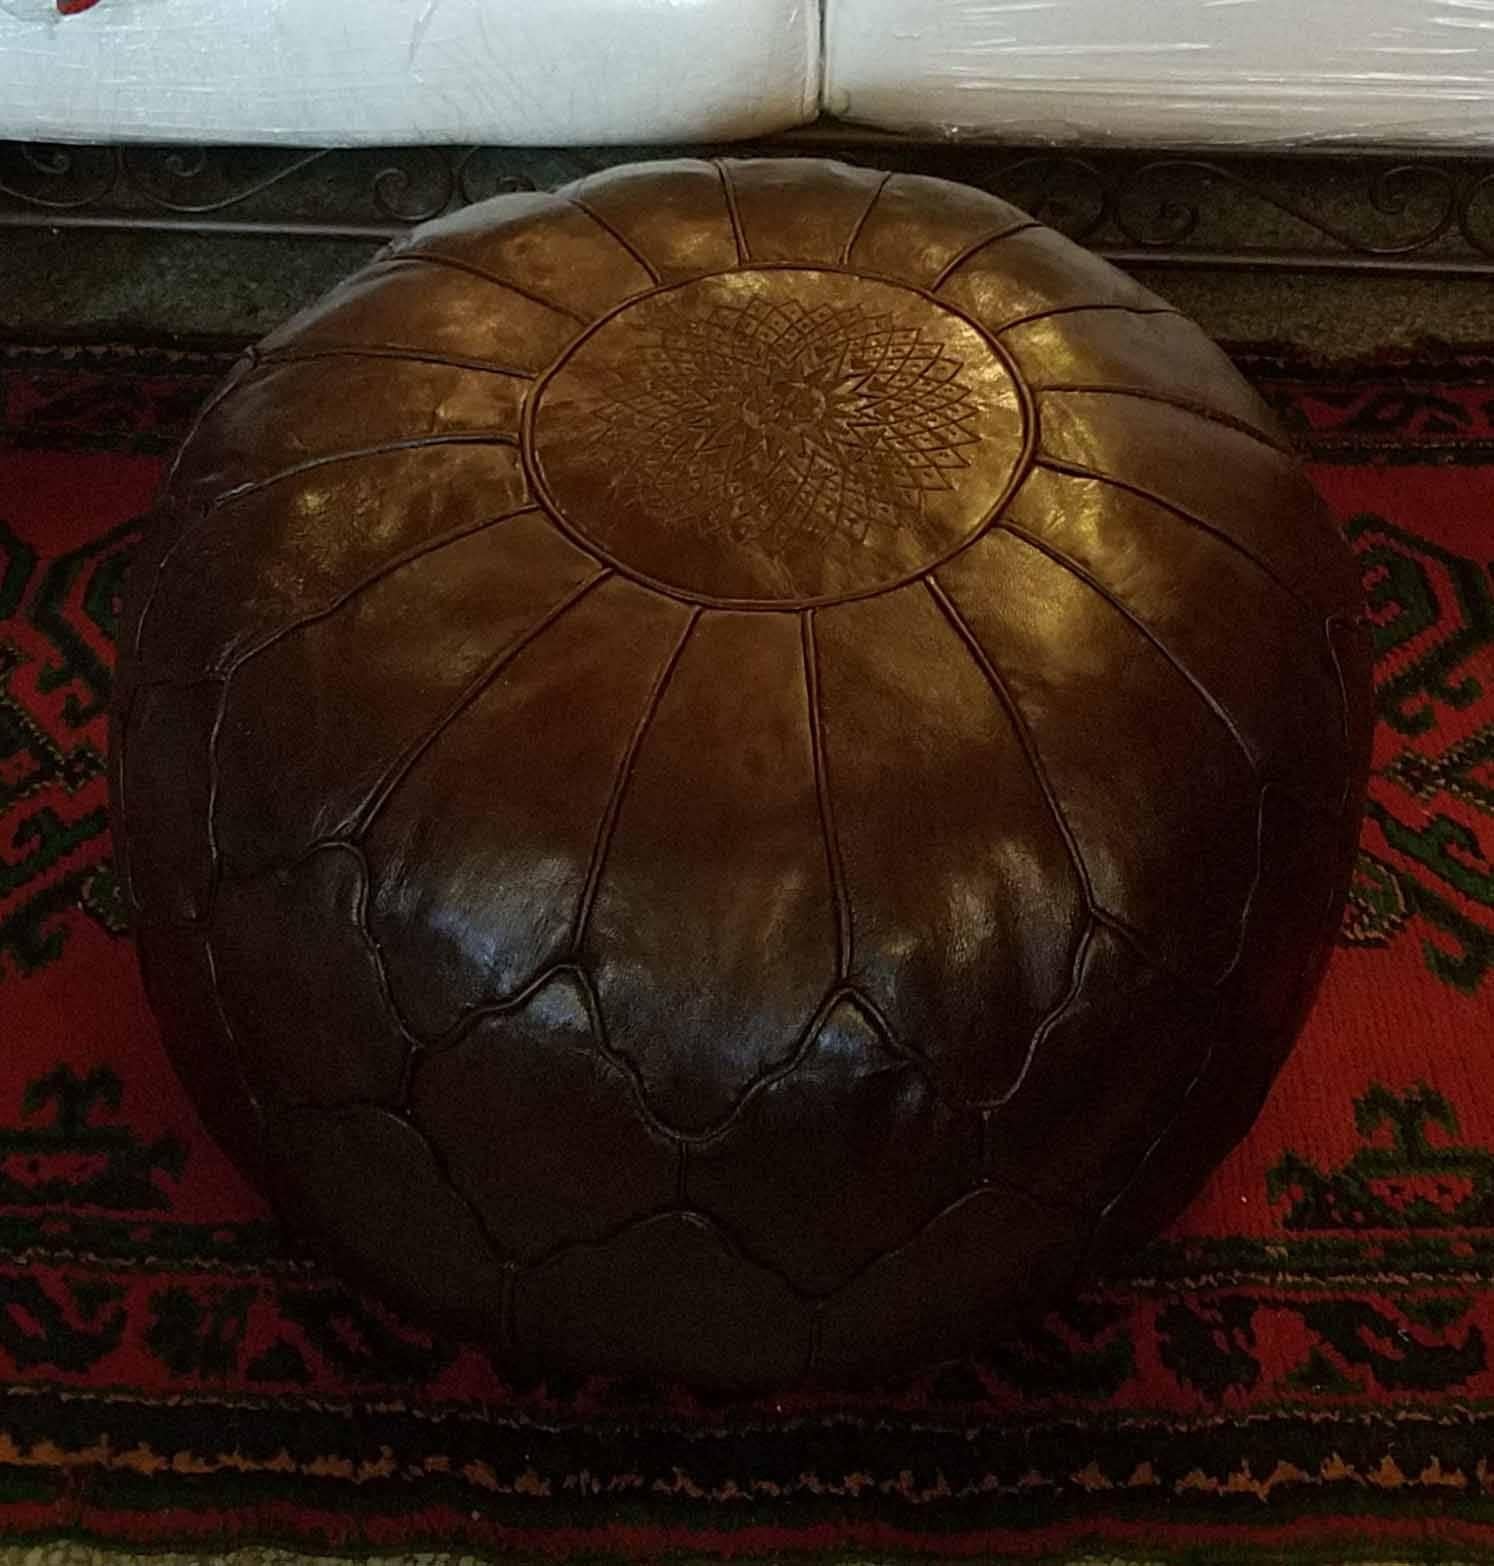 Oversize Moroccan Leather Pouf, Dark Chocolate Brown In Excellent Condition For Sale In Orlando, FL